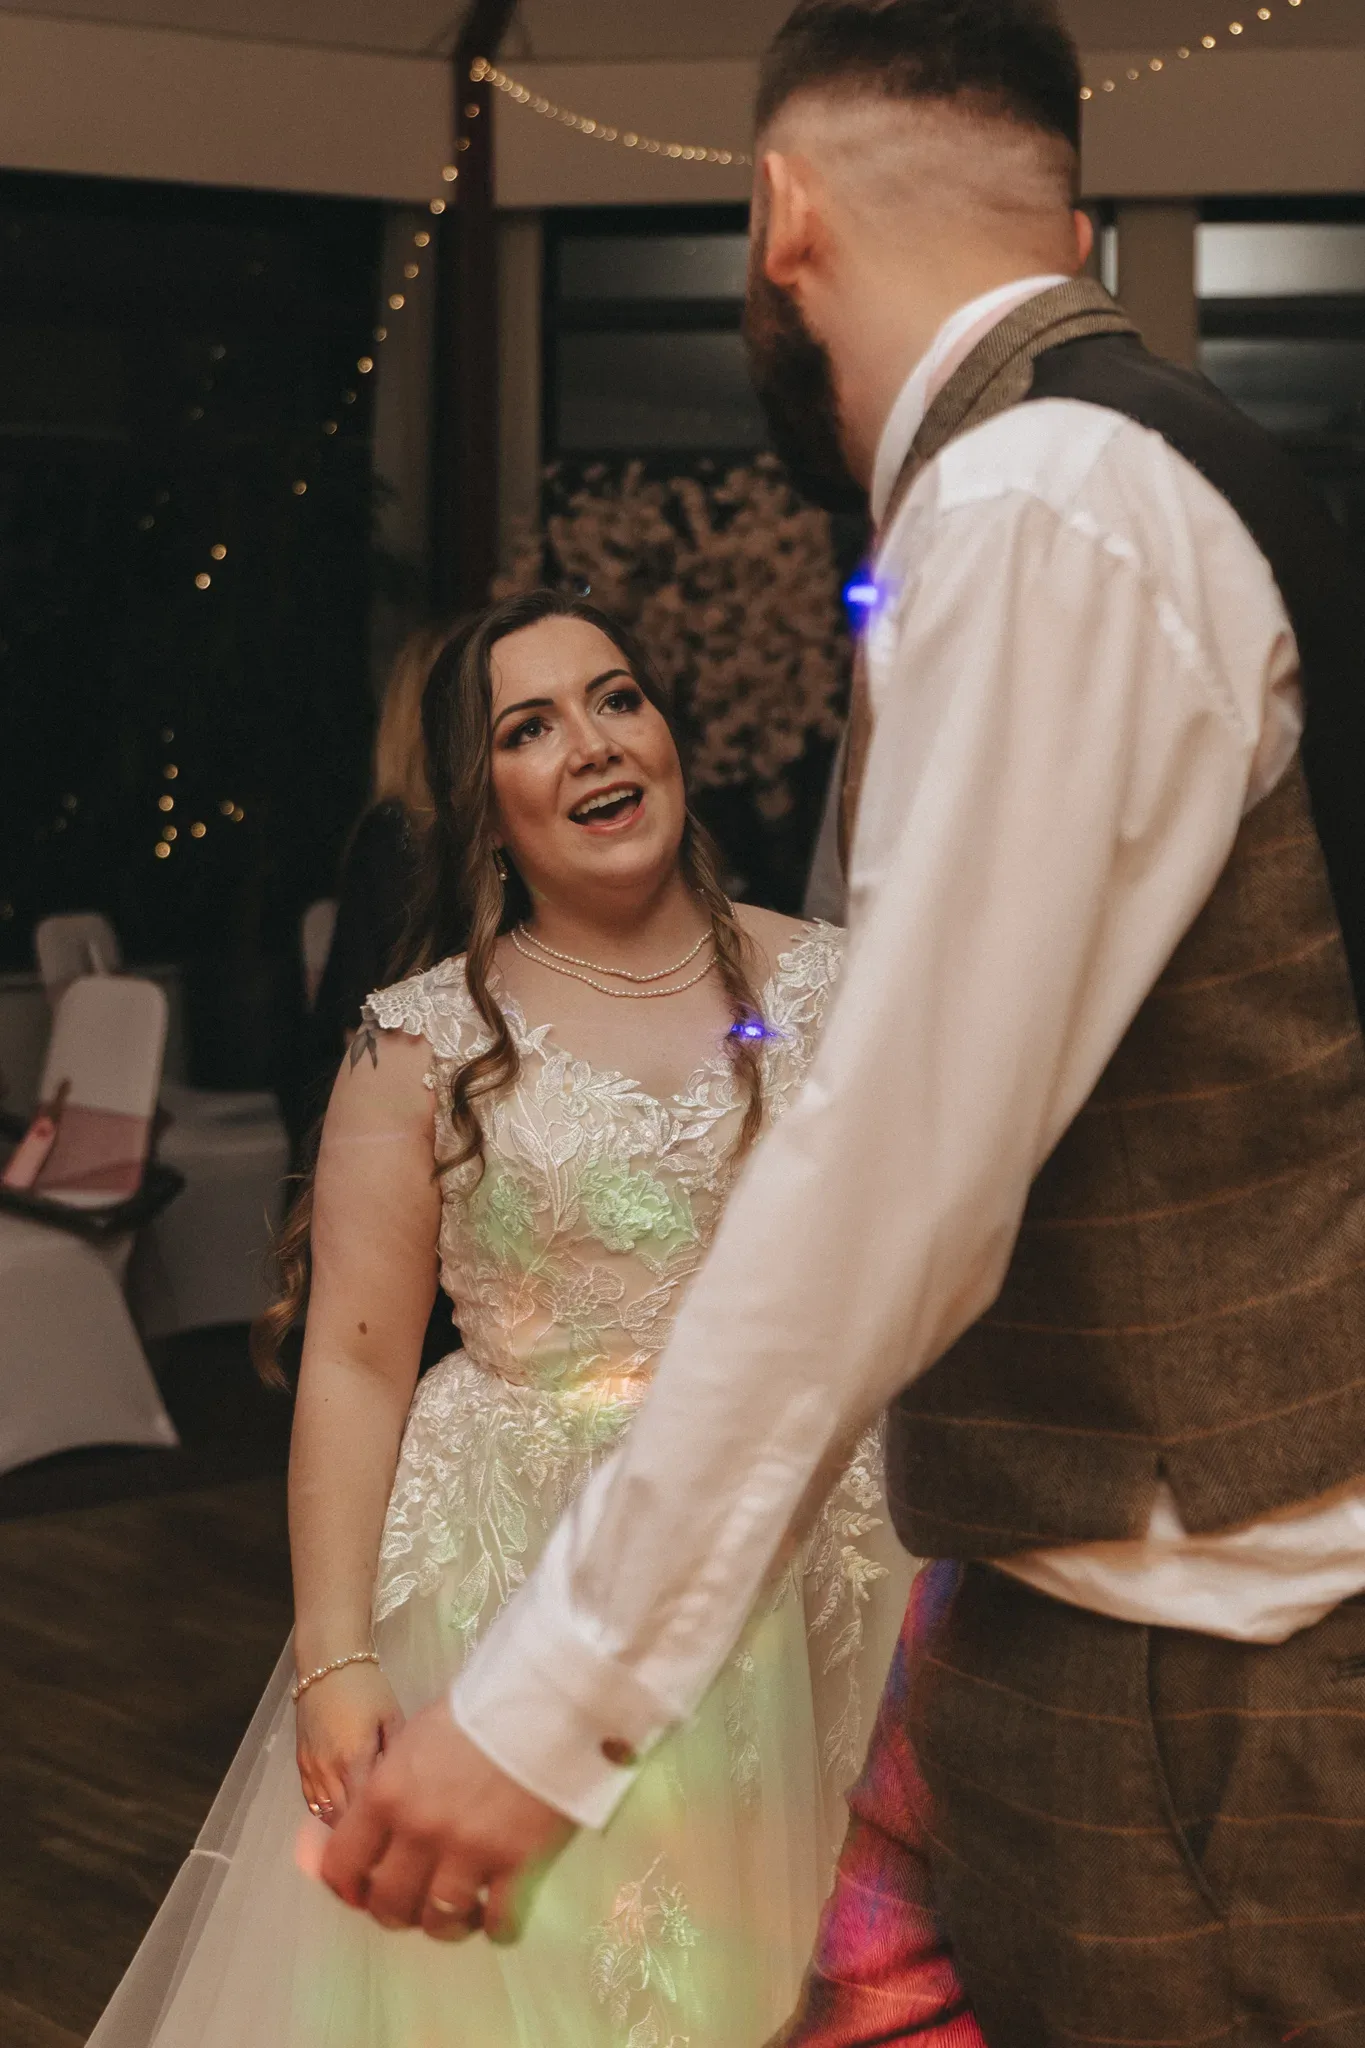 A bride with long wavy hair and a detailed dress smiles adoringly at a groom in a tweed vest. they hold hands while dancing, with festive lights and a warmly lit venue in the background.